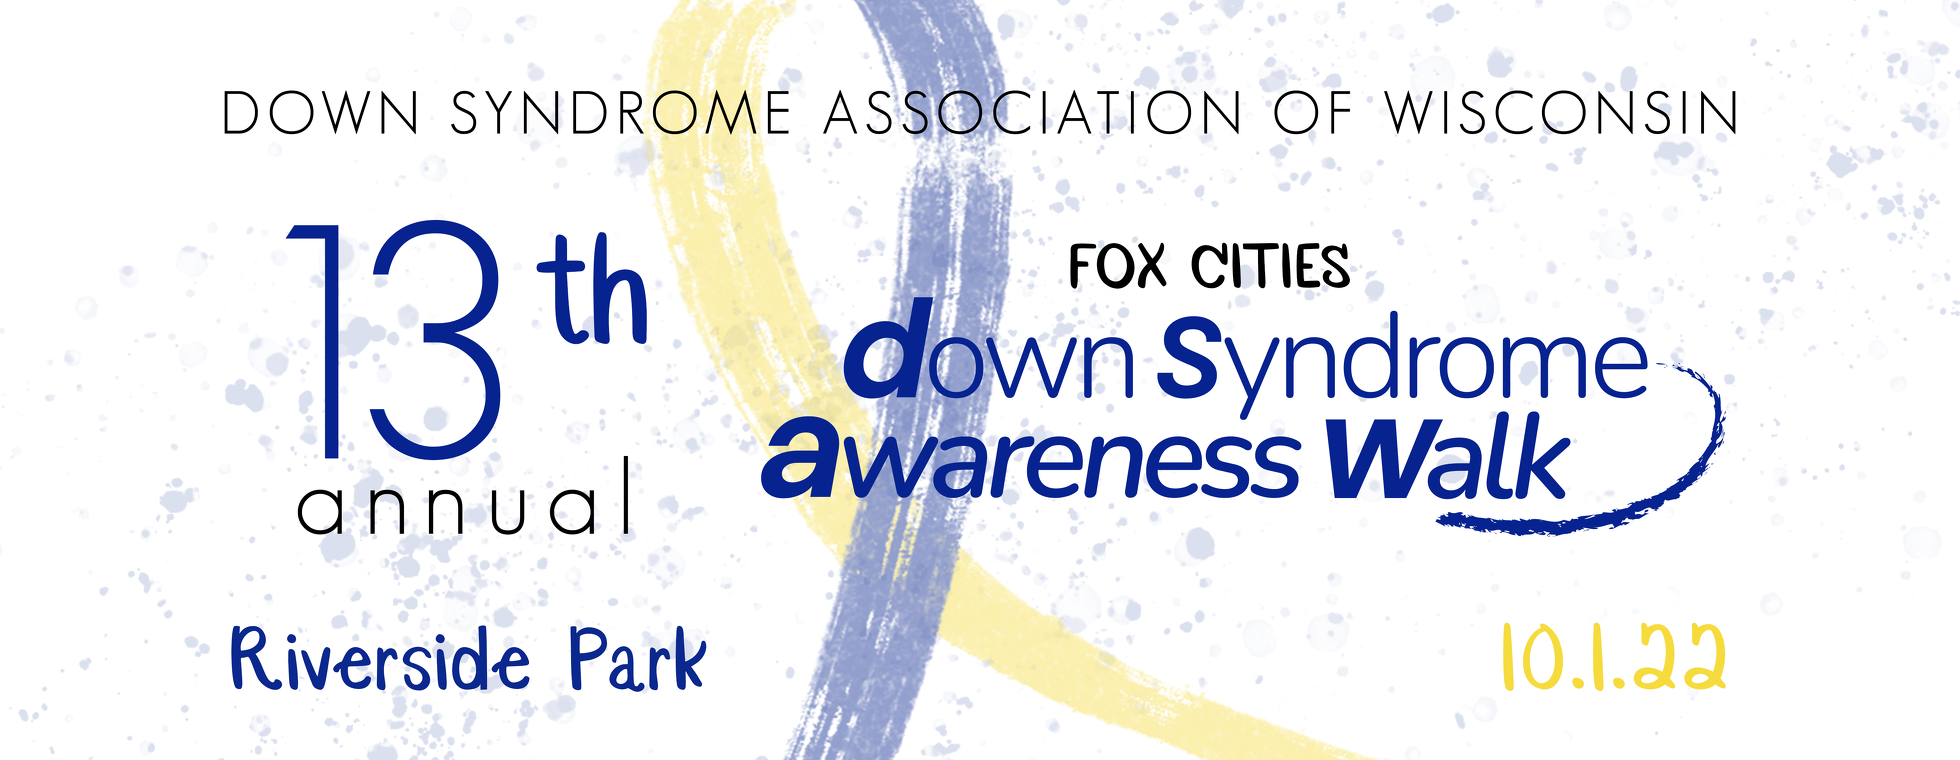 13th Annual DSAW-Fox Cities Down Syndrome Awareness Walk